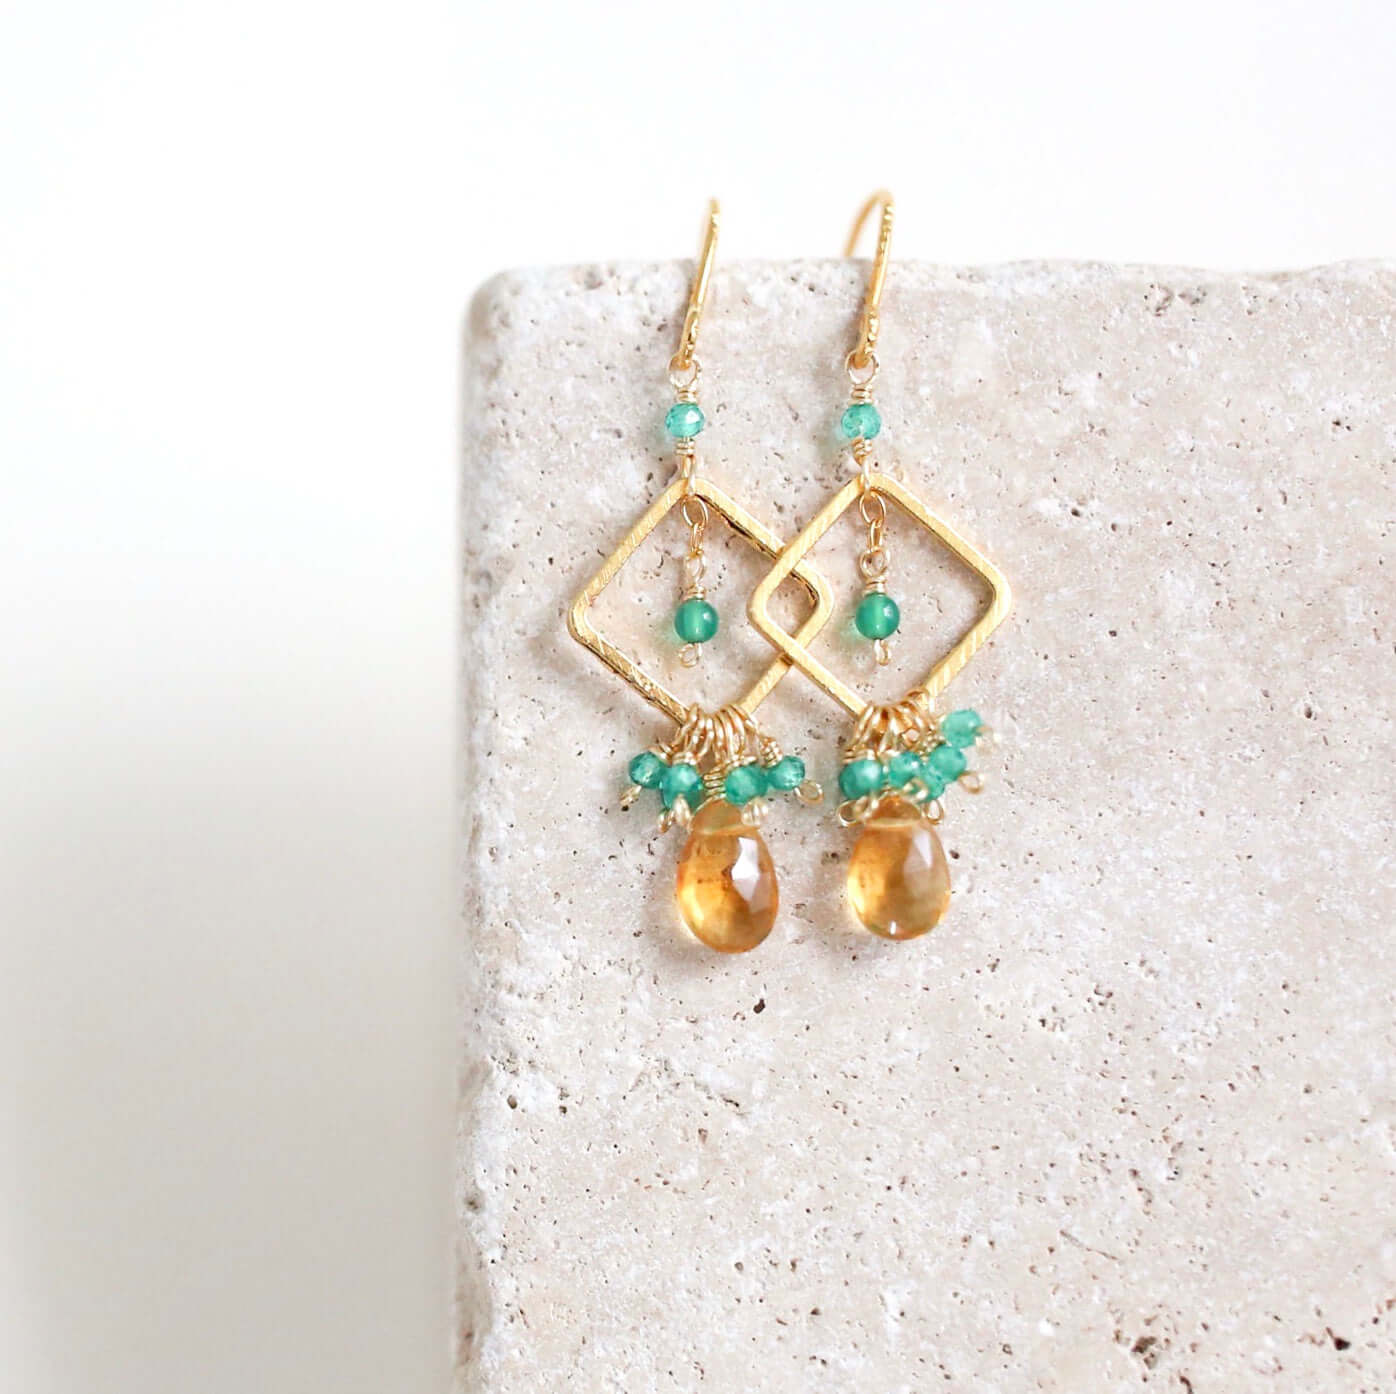  Citrine briolette gemstones with green onyx accent stones French Hook Gold Earrings 